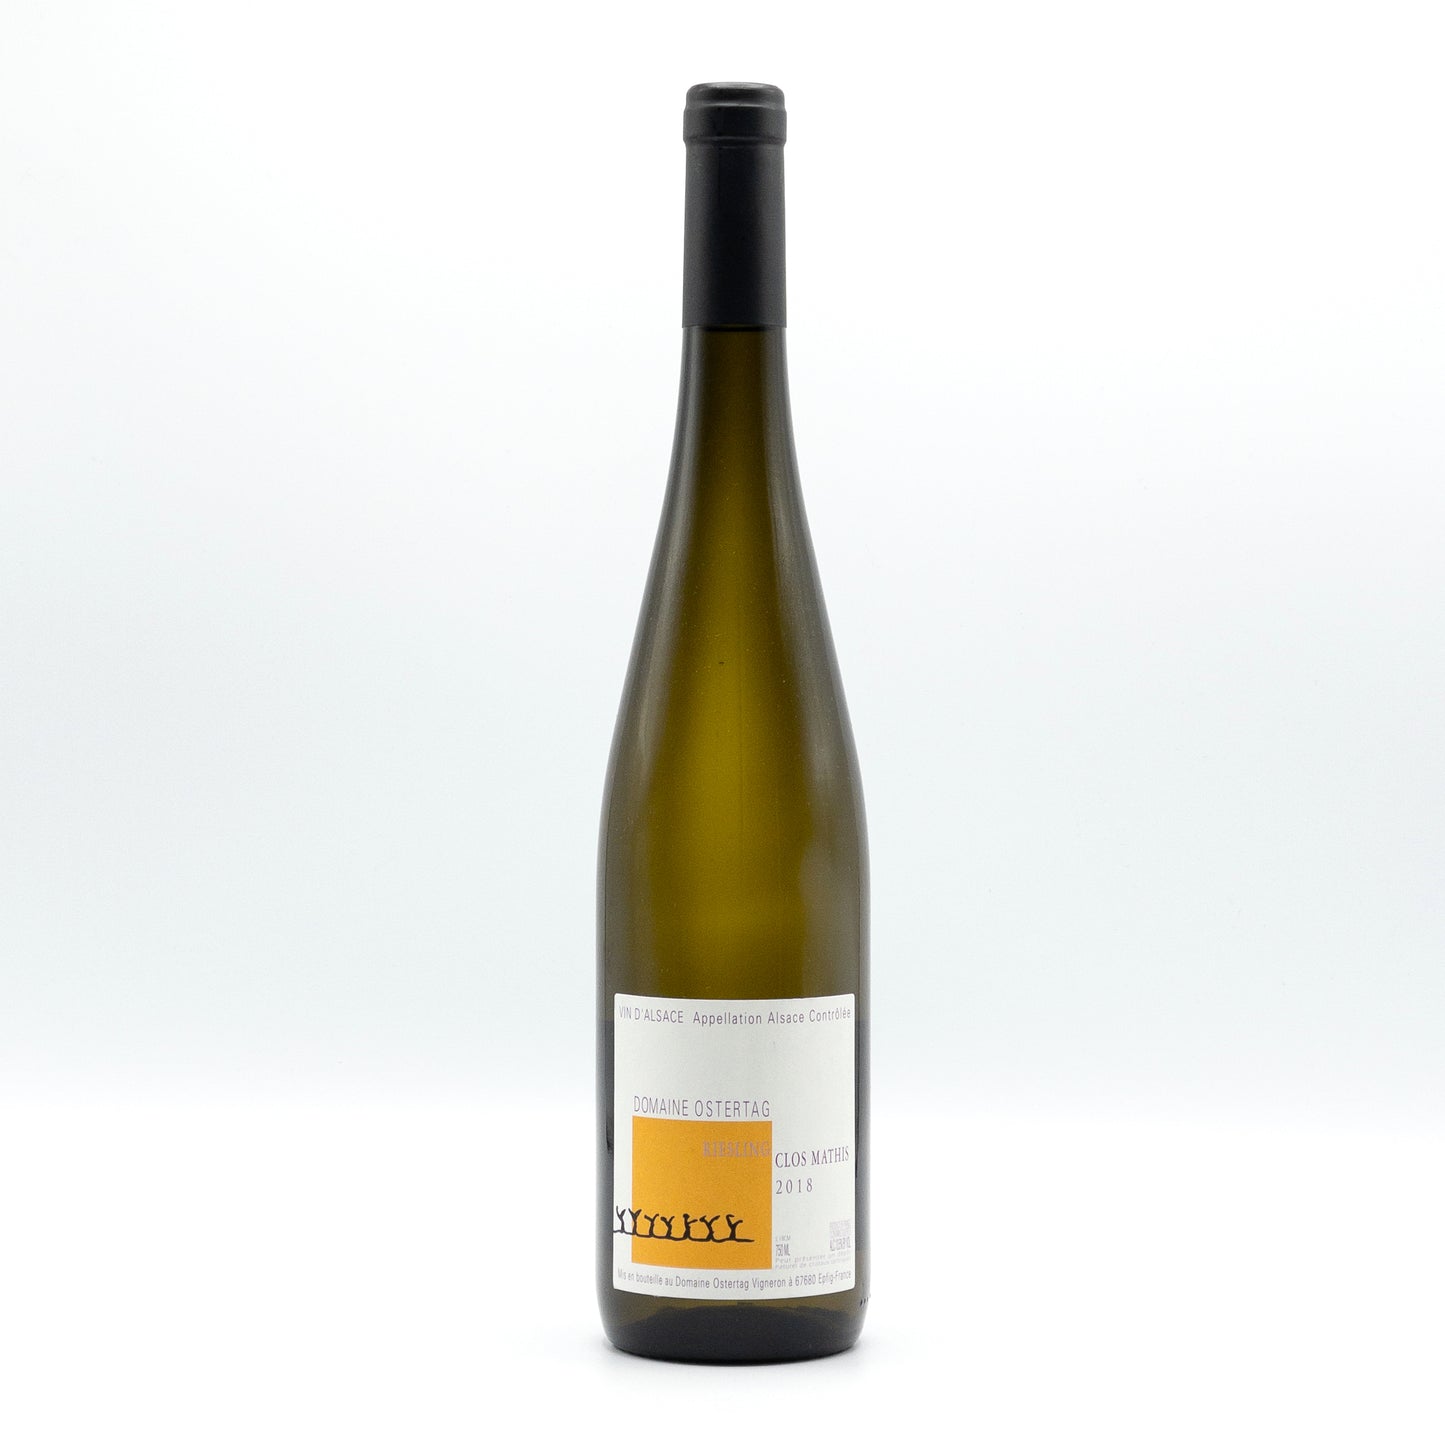 Riesling 'Clos Mathis', Domaine Ostertag, 2019